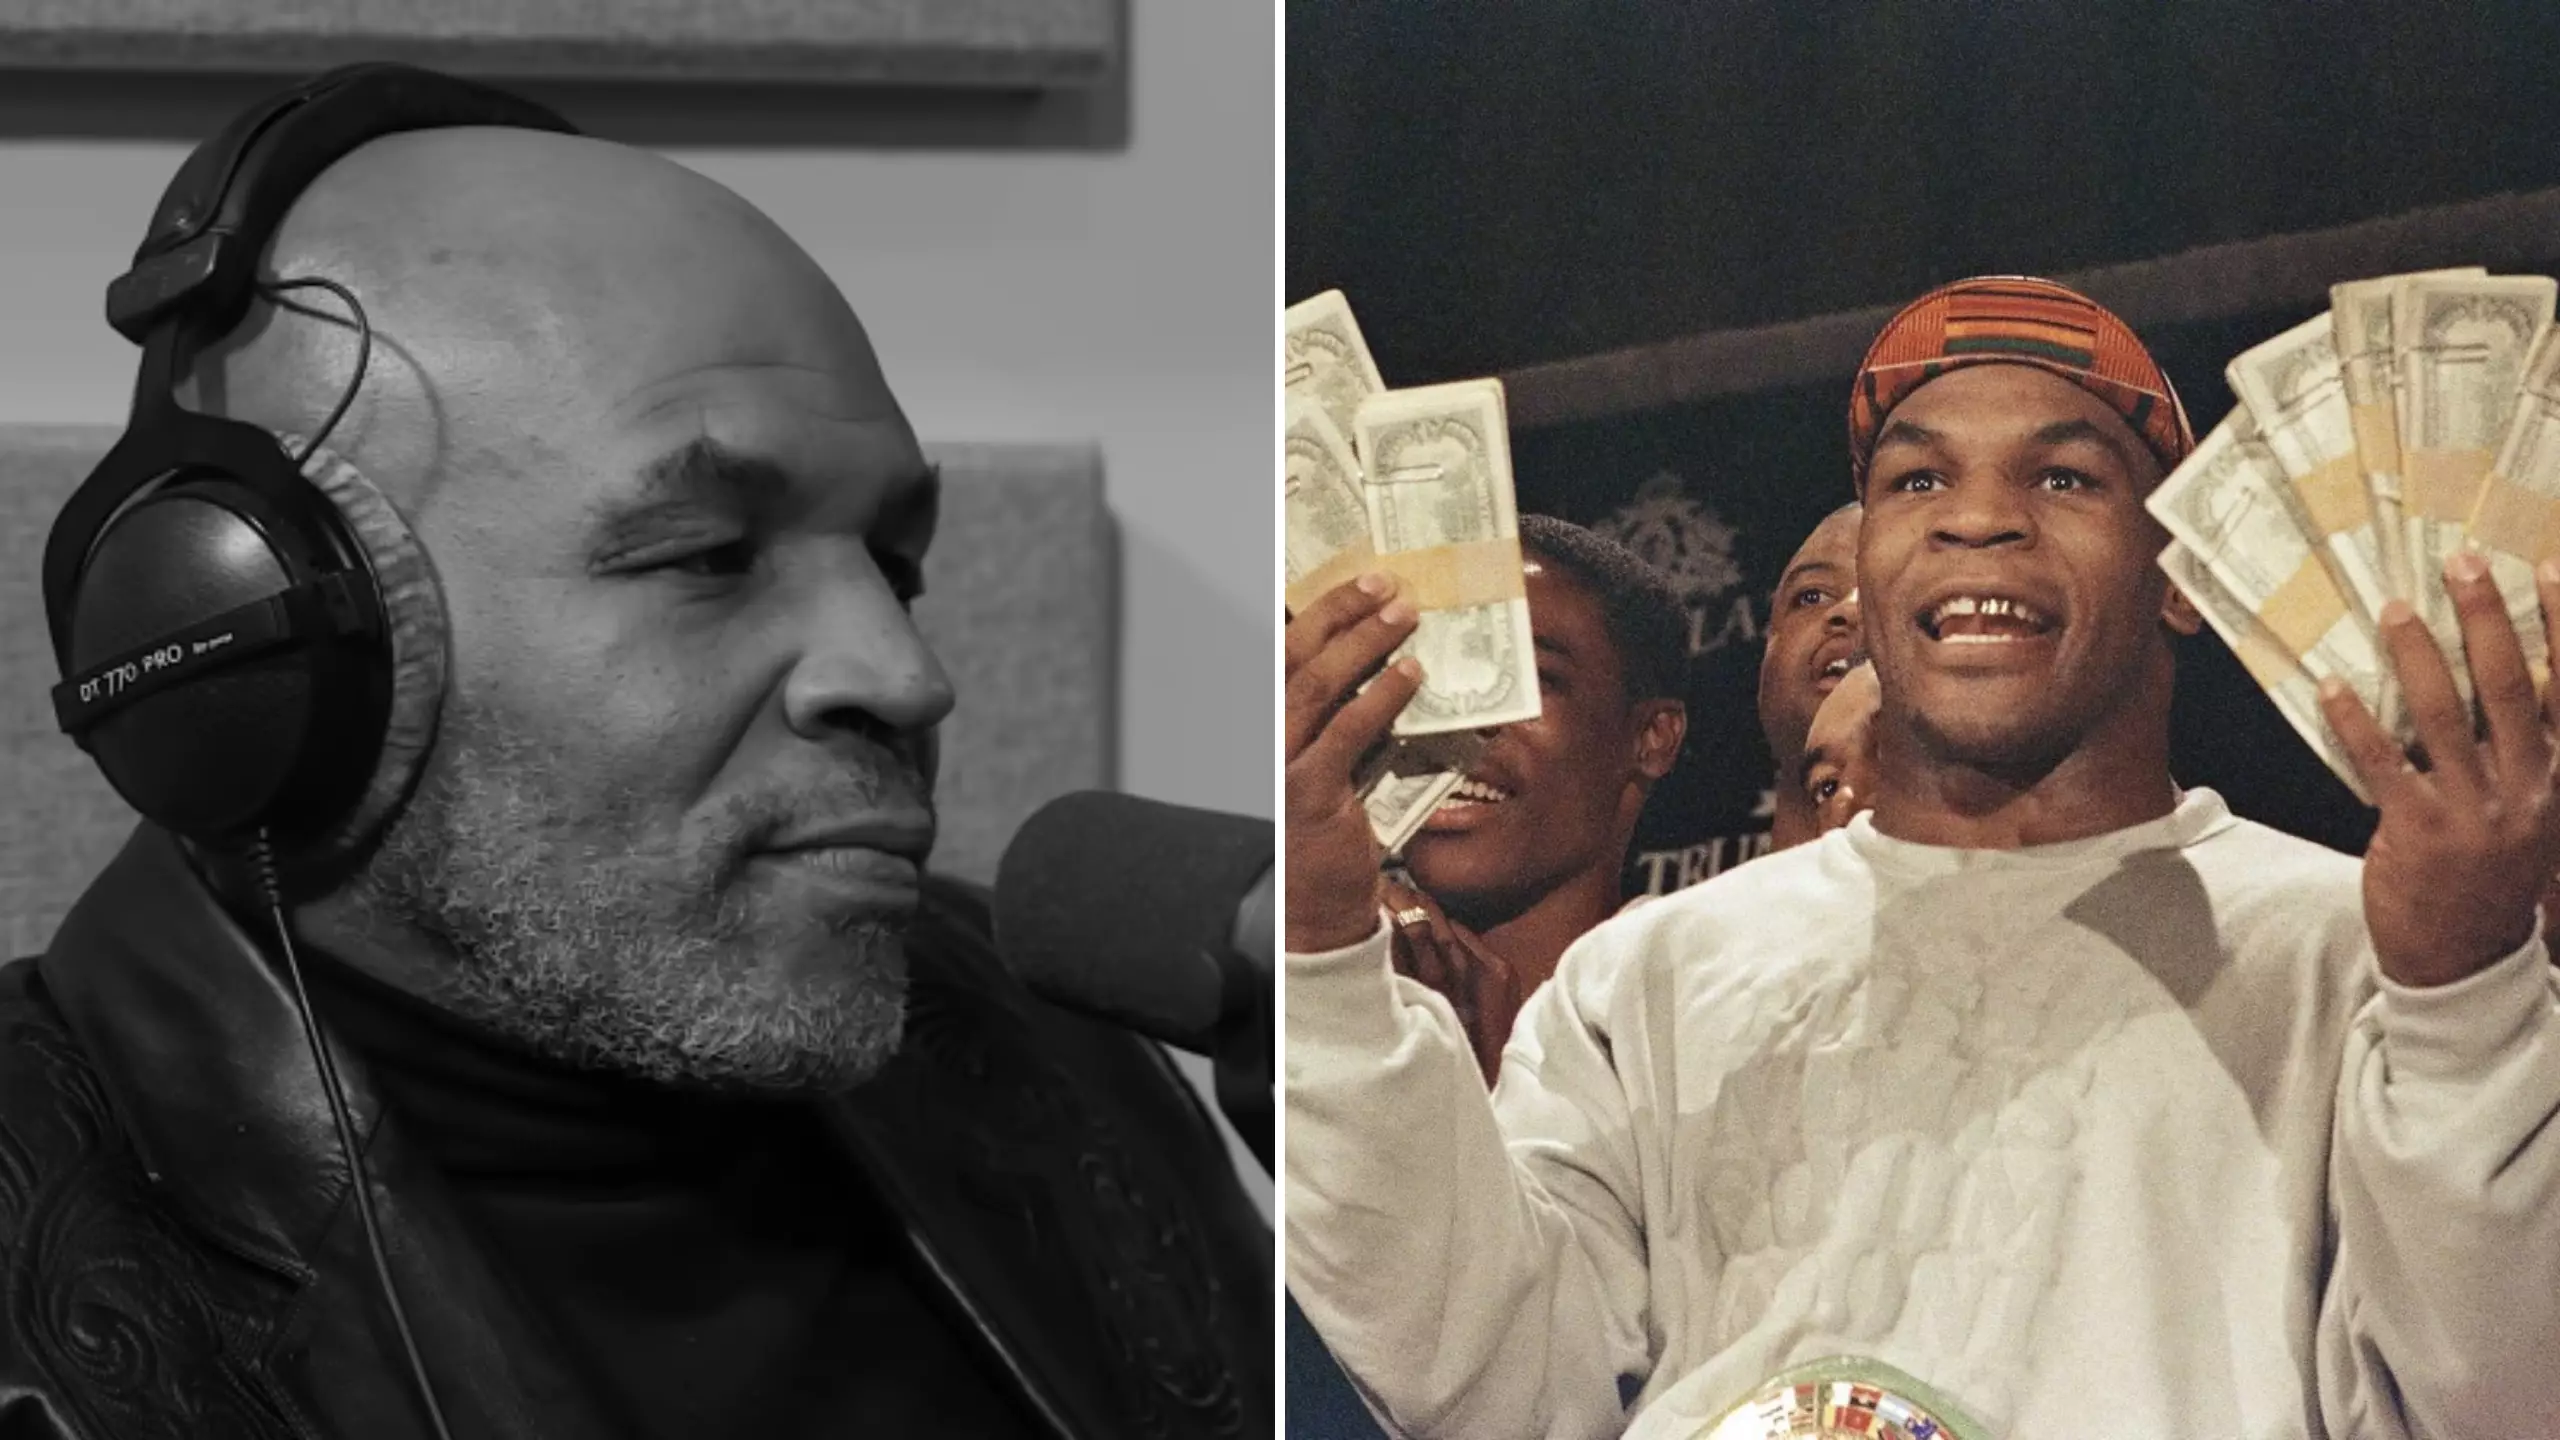 Mike Tyson Emotionally Discusses His 'Sick' Past While Being 'An Animal' With Money